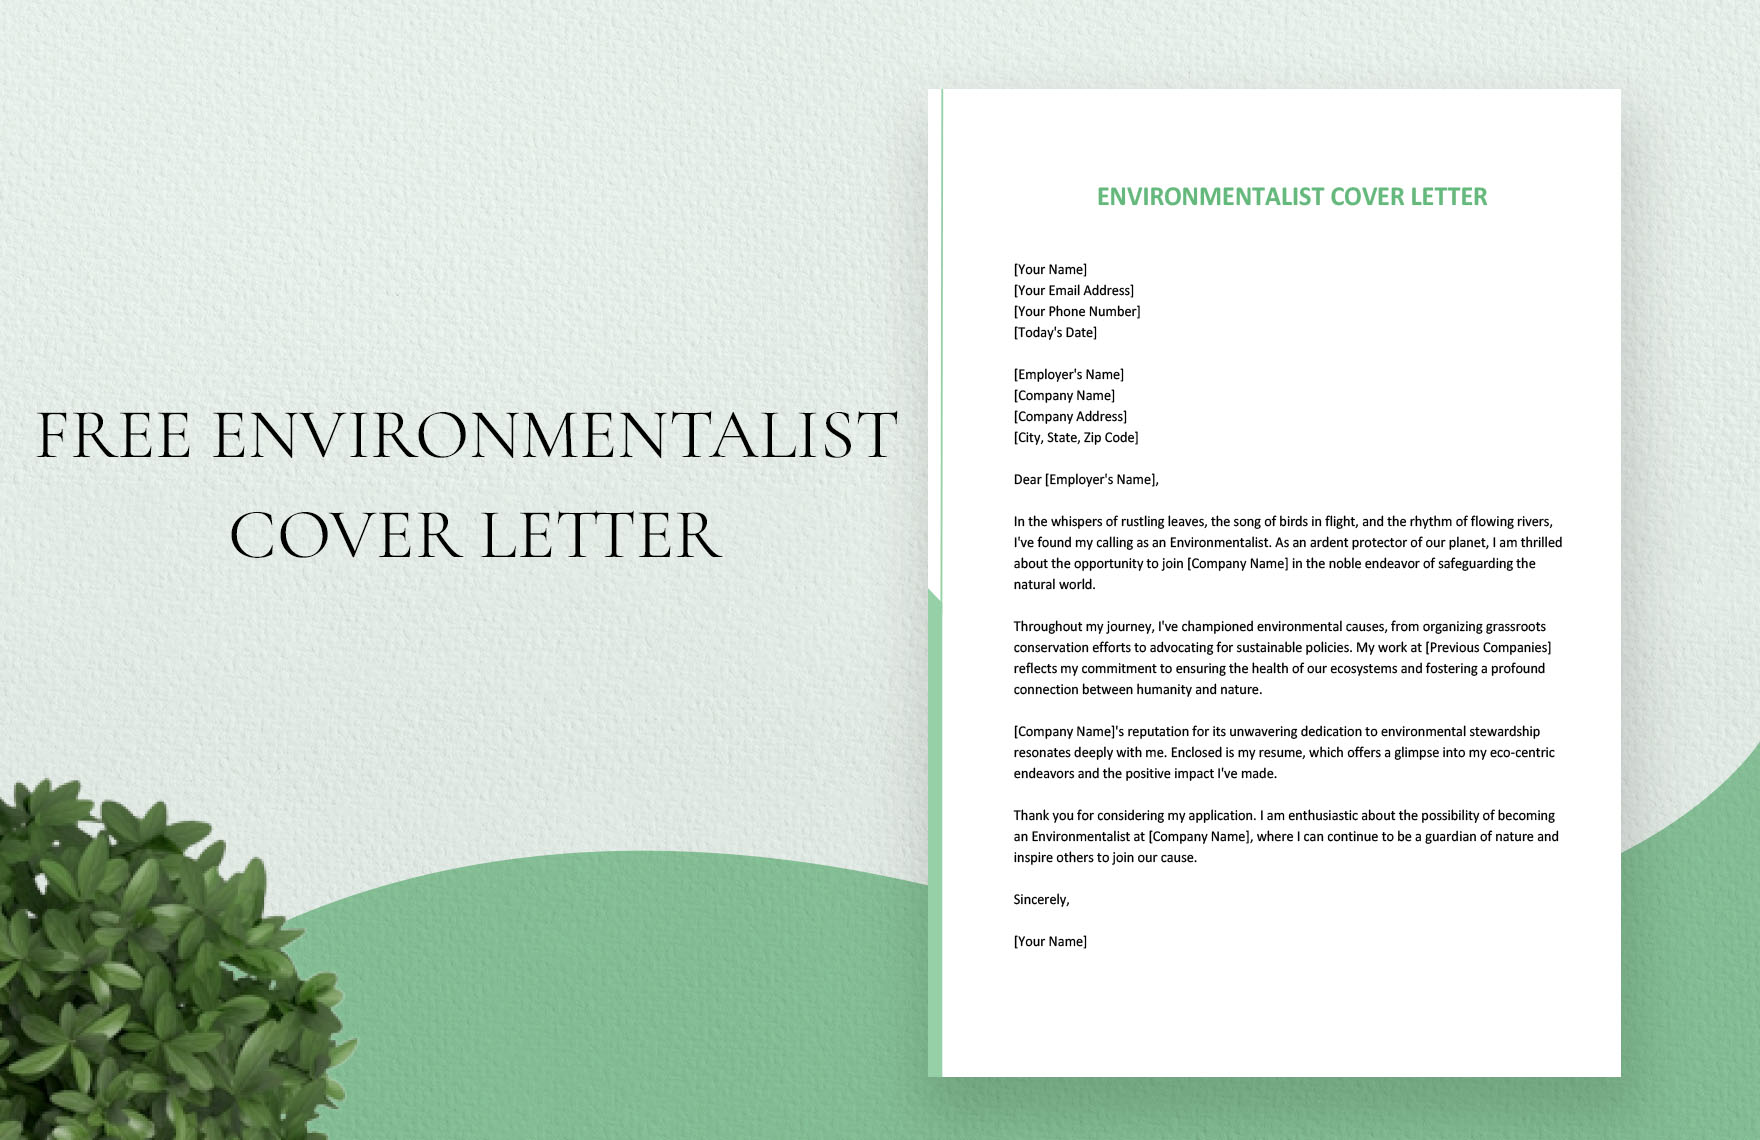 Environmentalist Cover Letter in Word, Google Docs